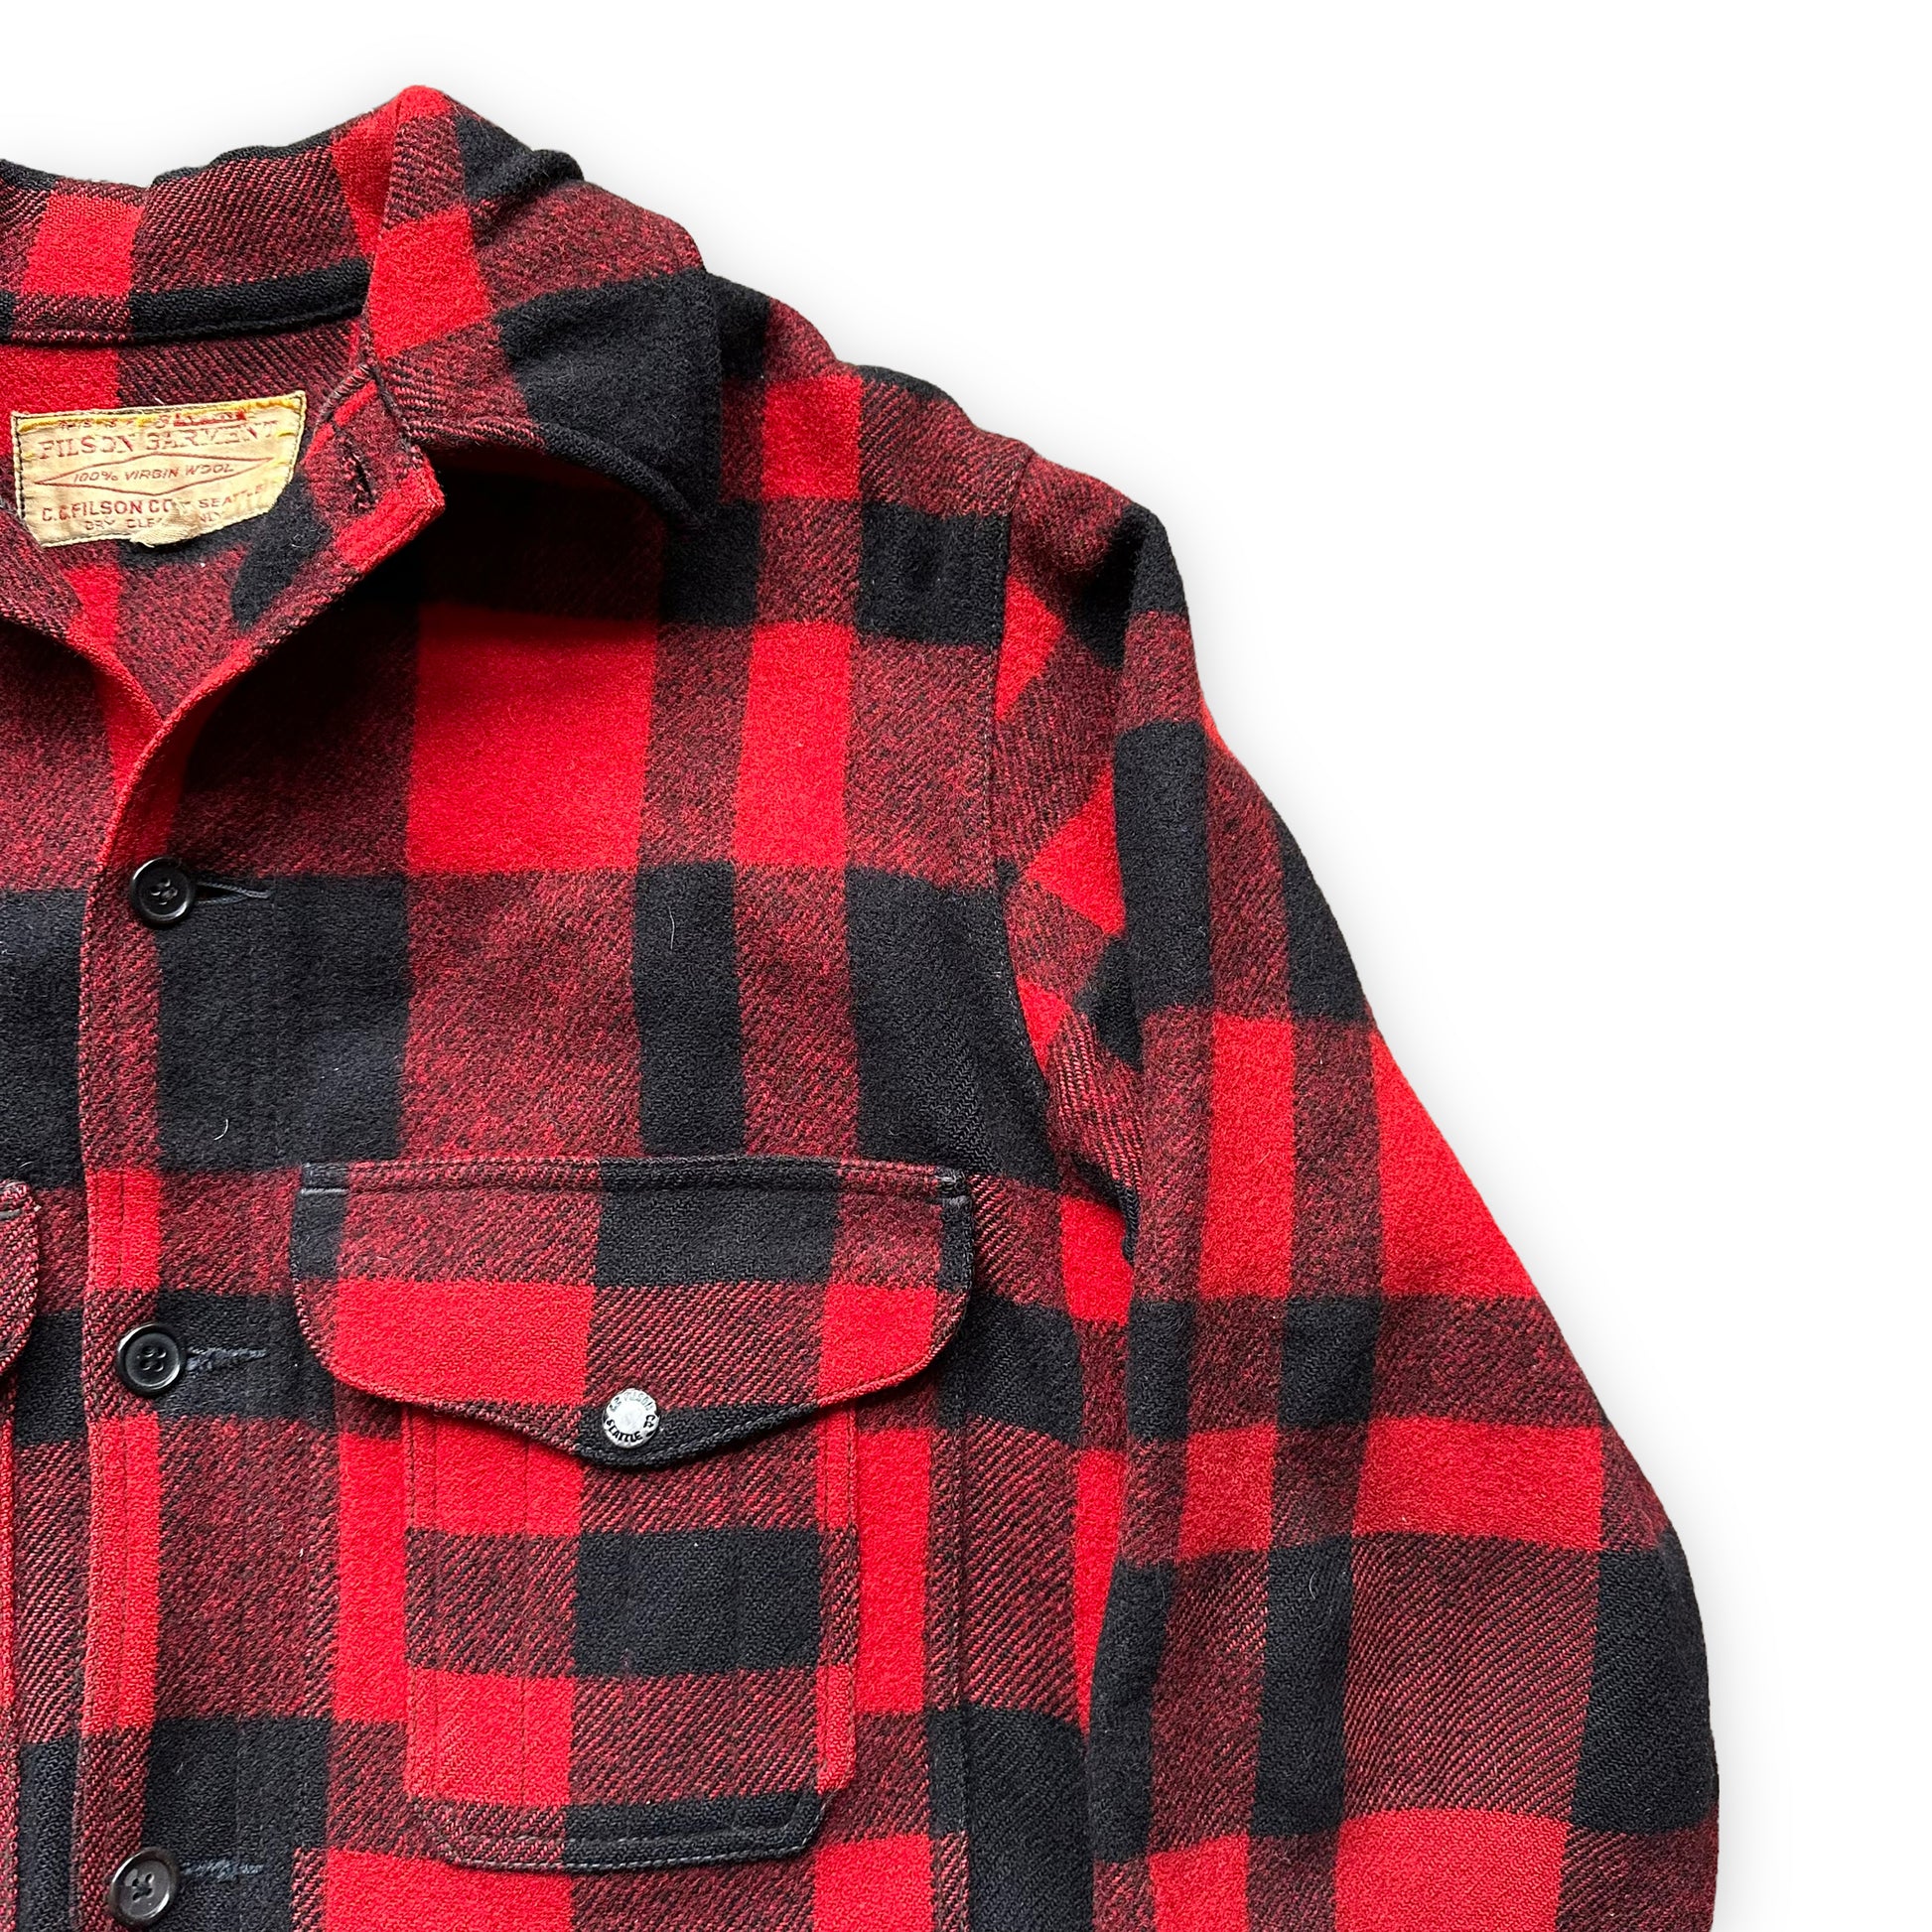 Upper Left View of Vintage Early 1970s Filson Union Made Red and Black Mackinaw Cruiser SZ 44 |  Vintage Filson Cruiser | Vintage Workwear Seattle